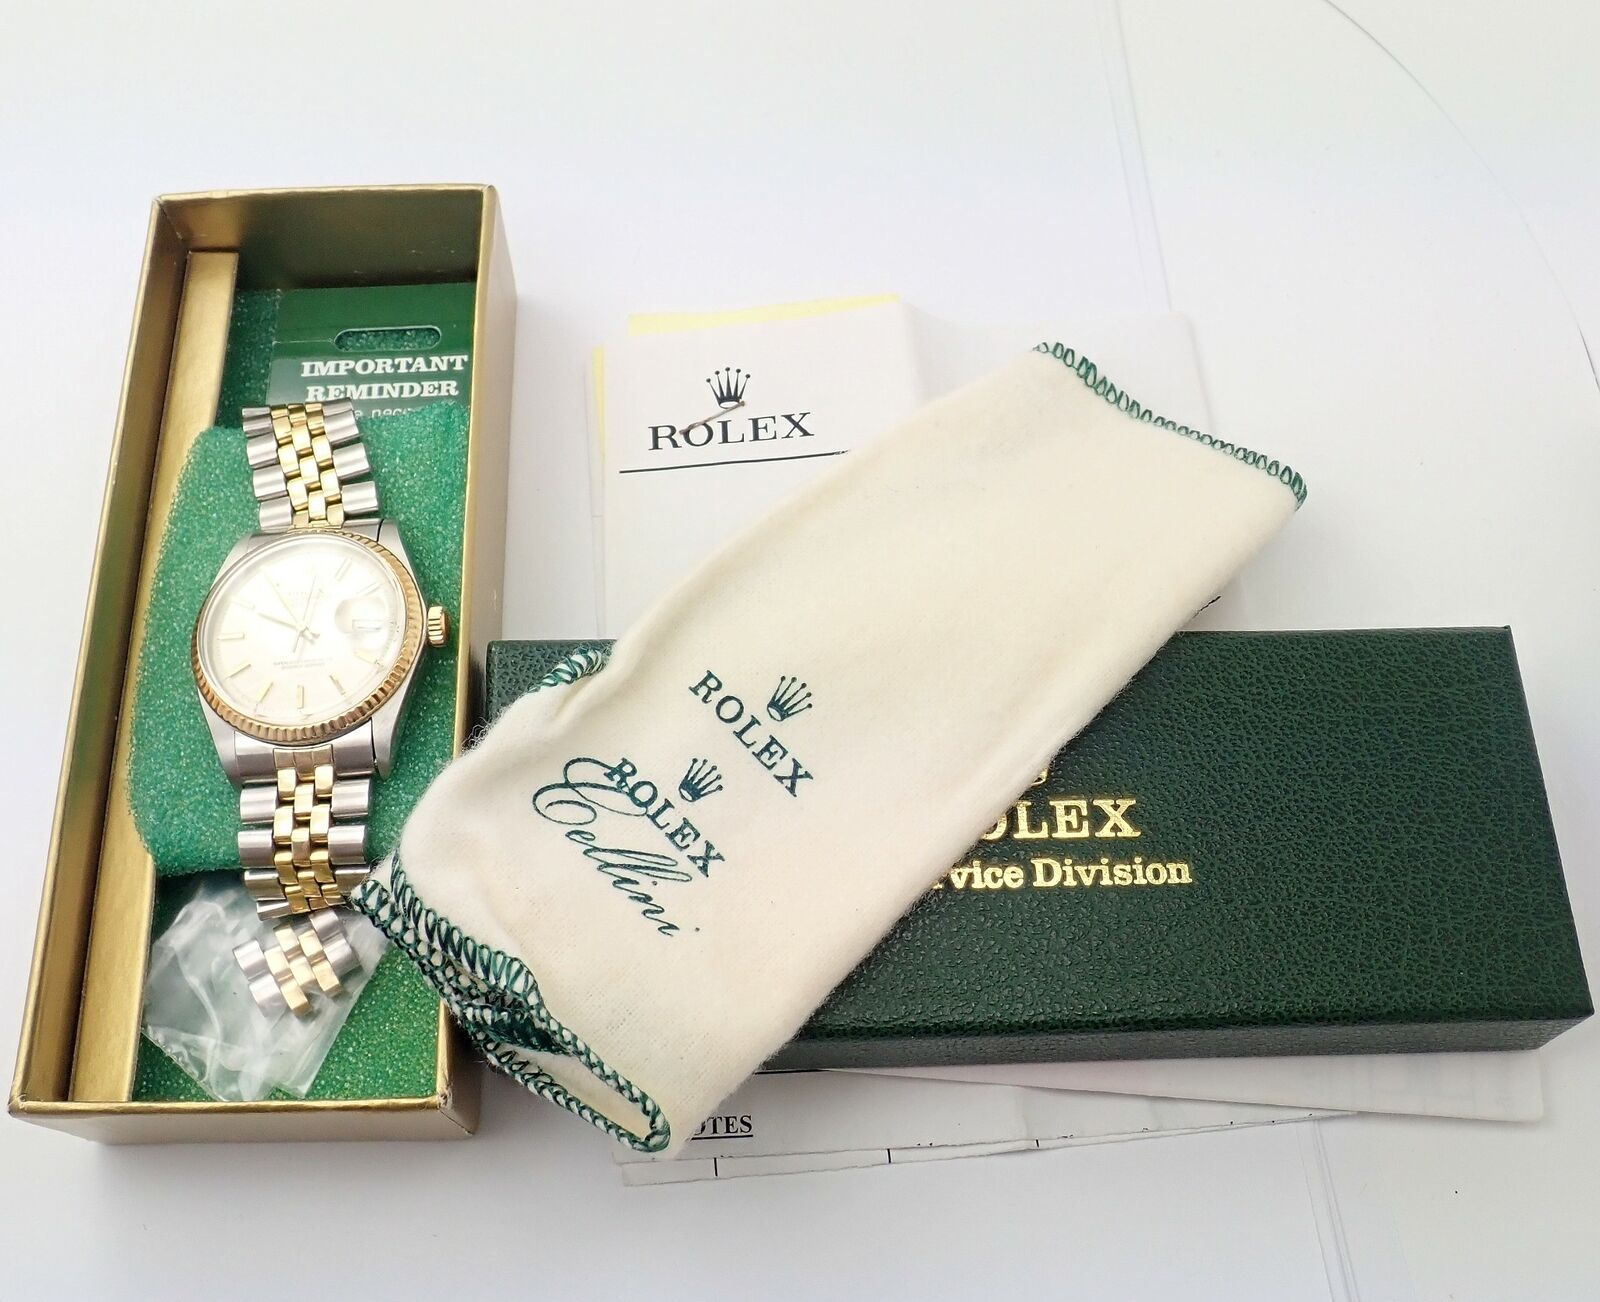 Rolex Jewelry & Watches:Watches, Parts & Accessories:Watches:Wristwatches Rolex DateJust 18k Gold + Steel Mens Automatic Jubilee Fluted Bezel Watch 1601